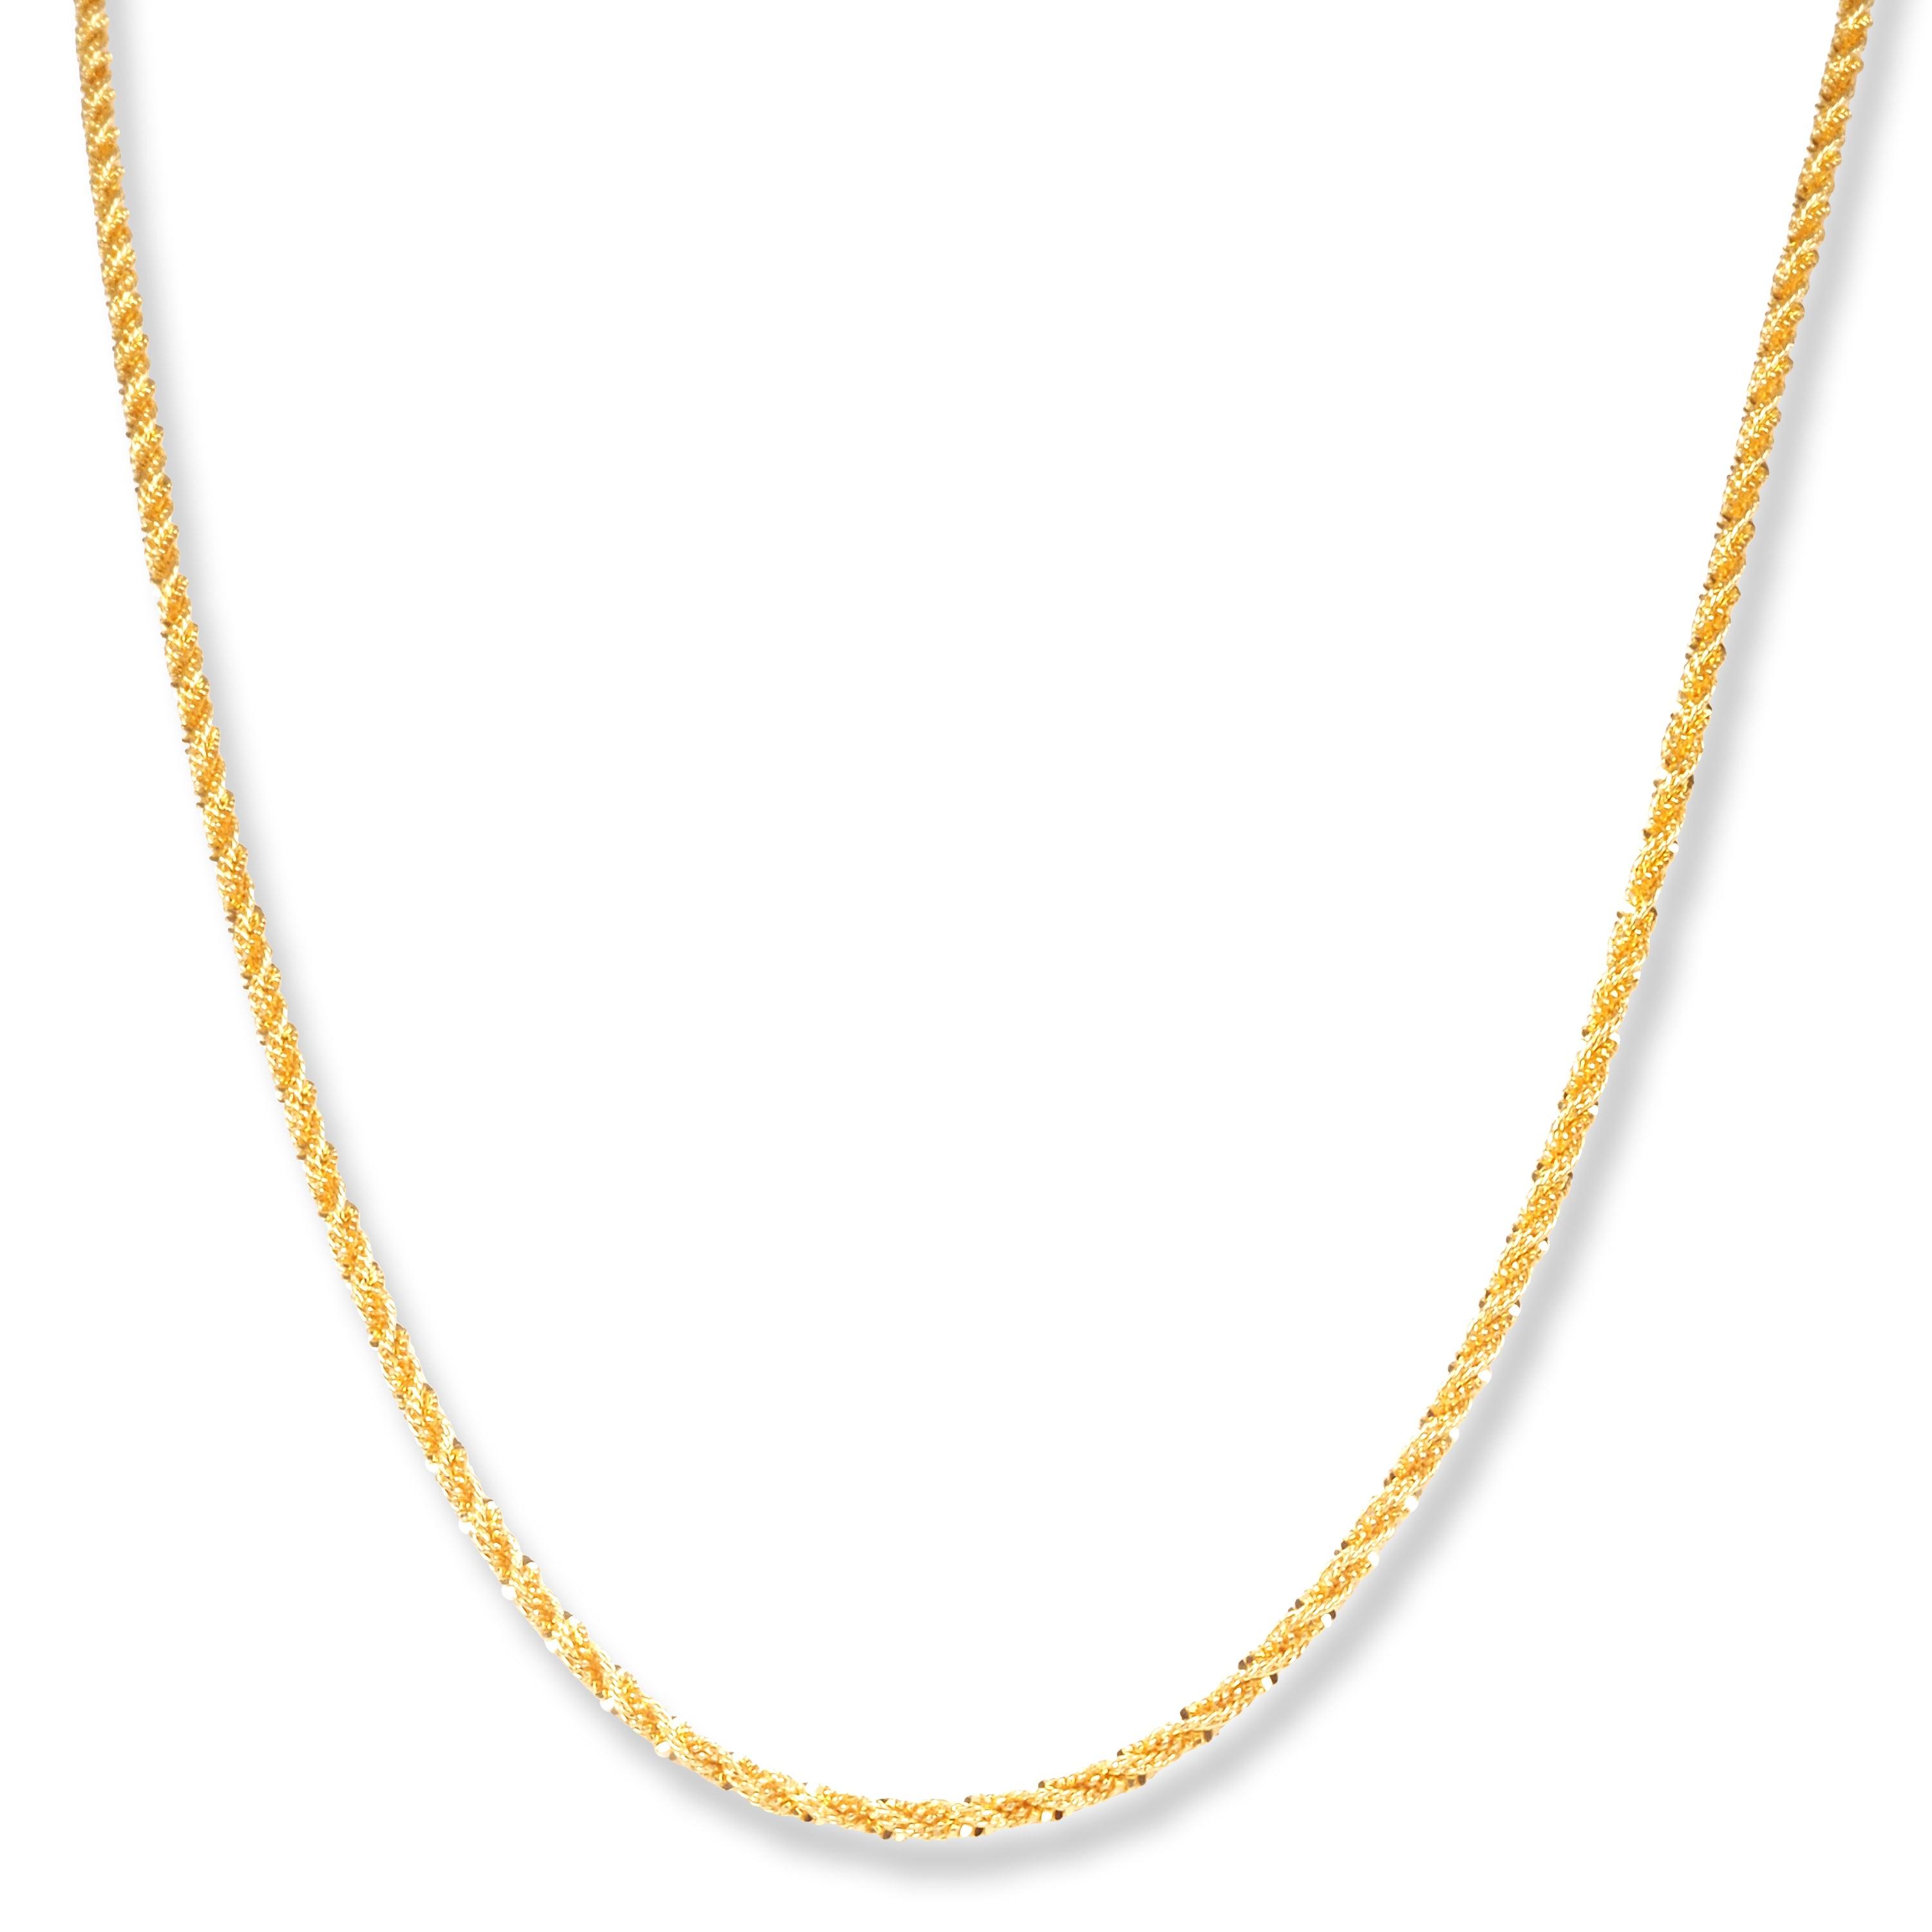 22ct Gold Fancy Rope Chain with Lobster Clasp C-4747 - Minar Jewellers